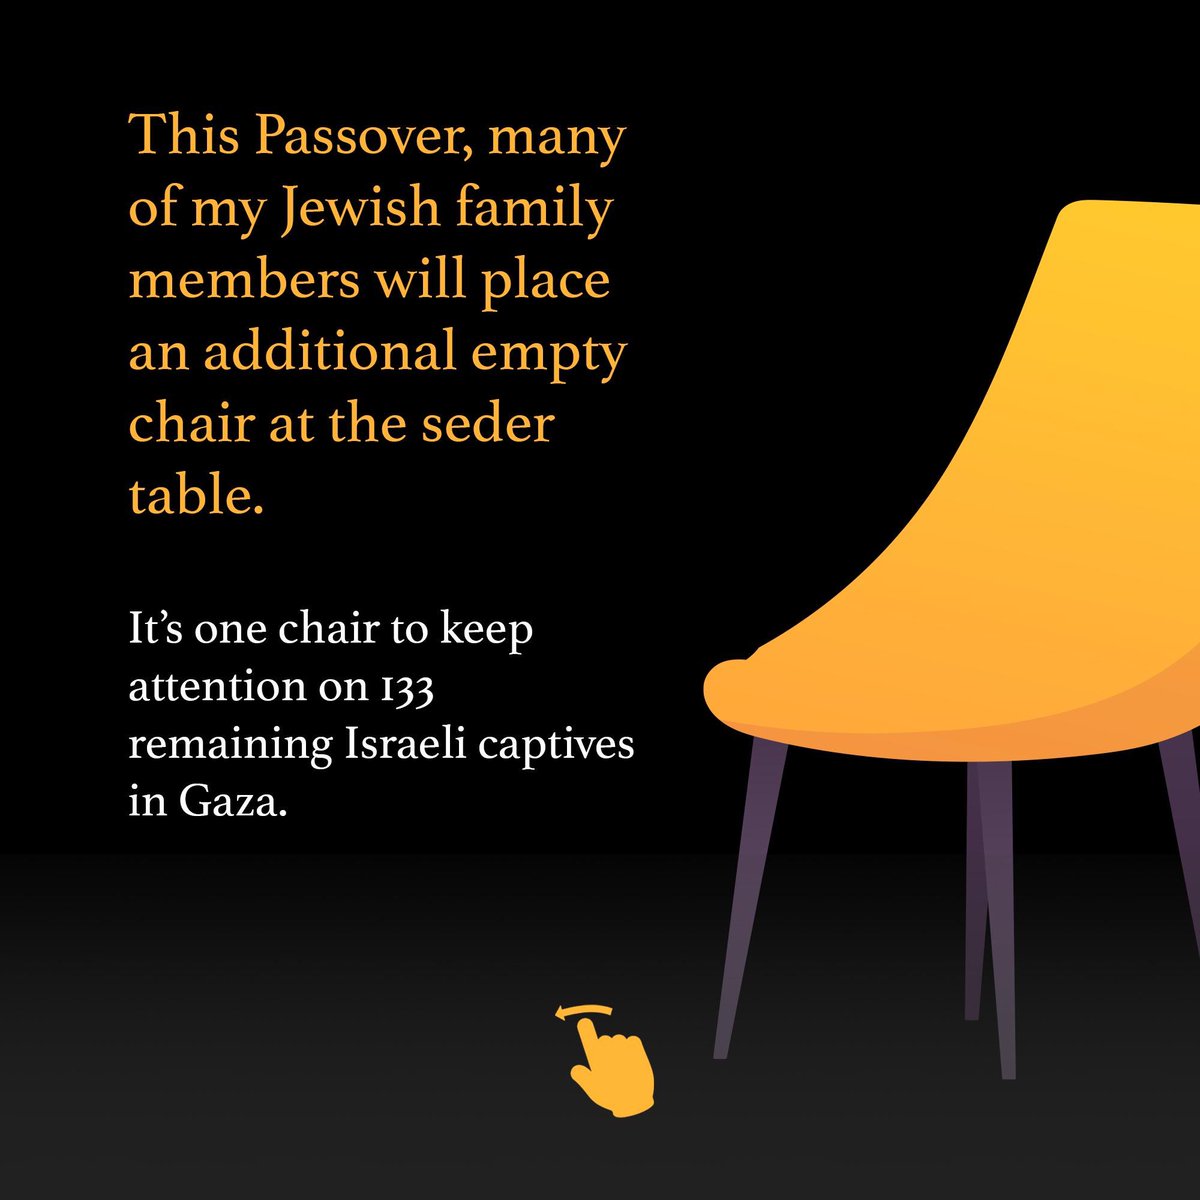 This Passover, many of my Jewish family members will place an additional empty chair at the Seder table. It’s one chair to keep attention on 133 remaining Israeli captives in Gaza. 🧵